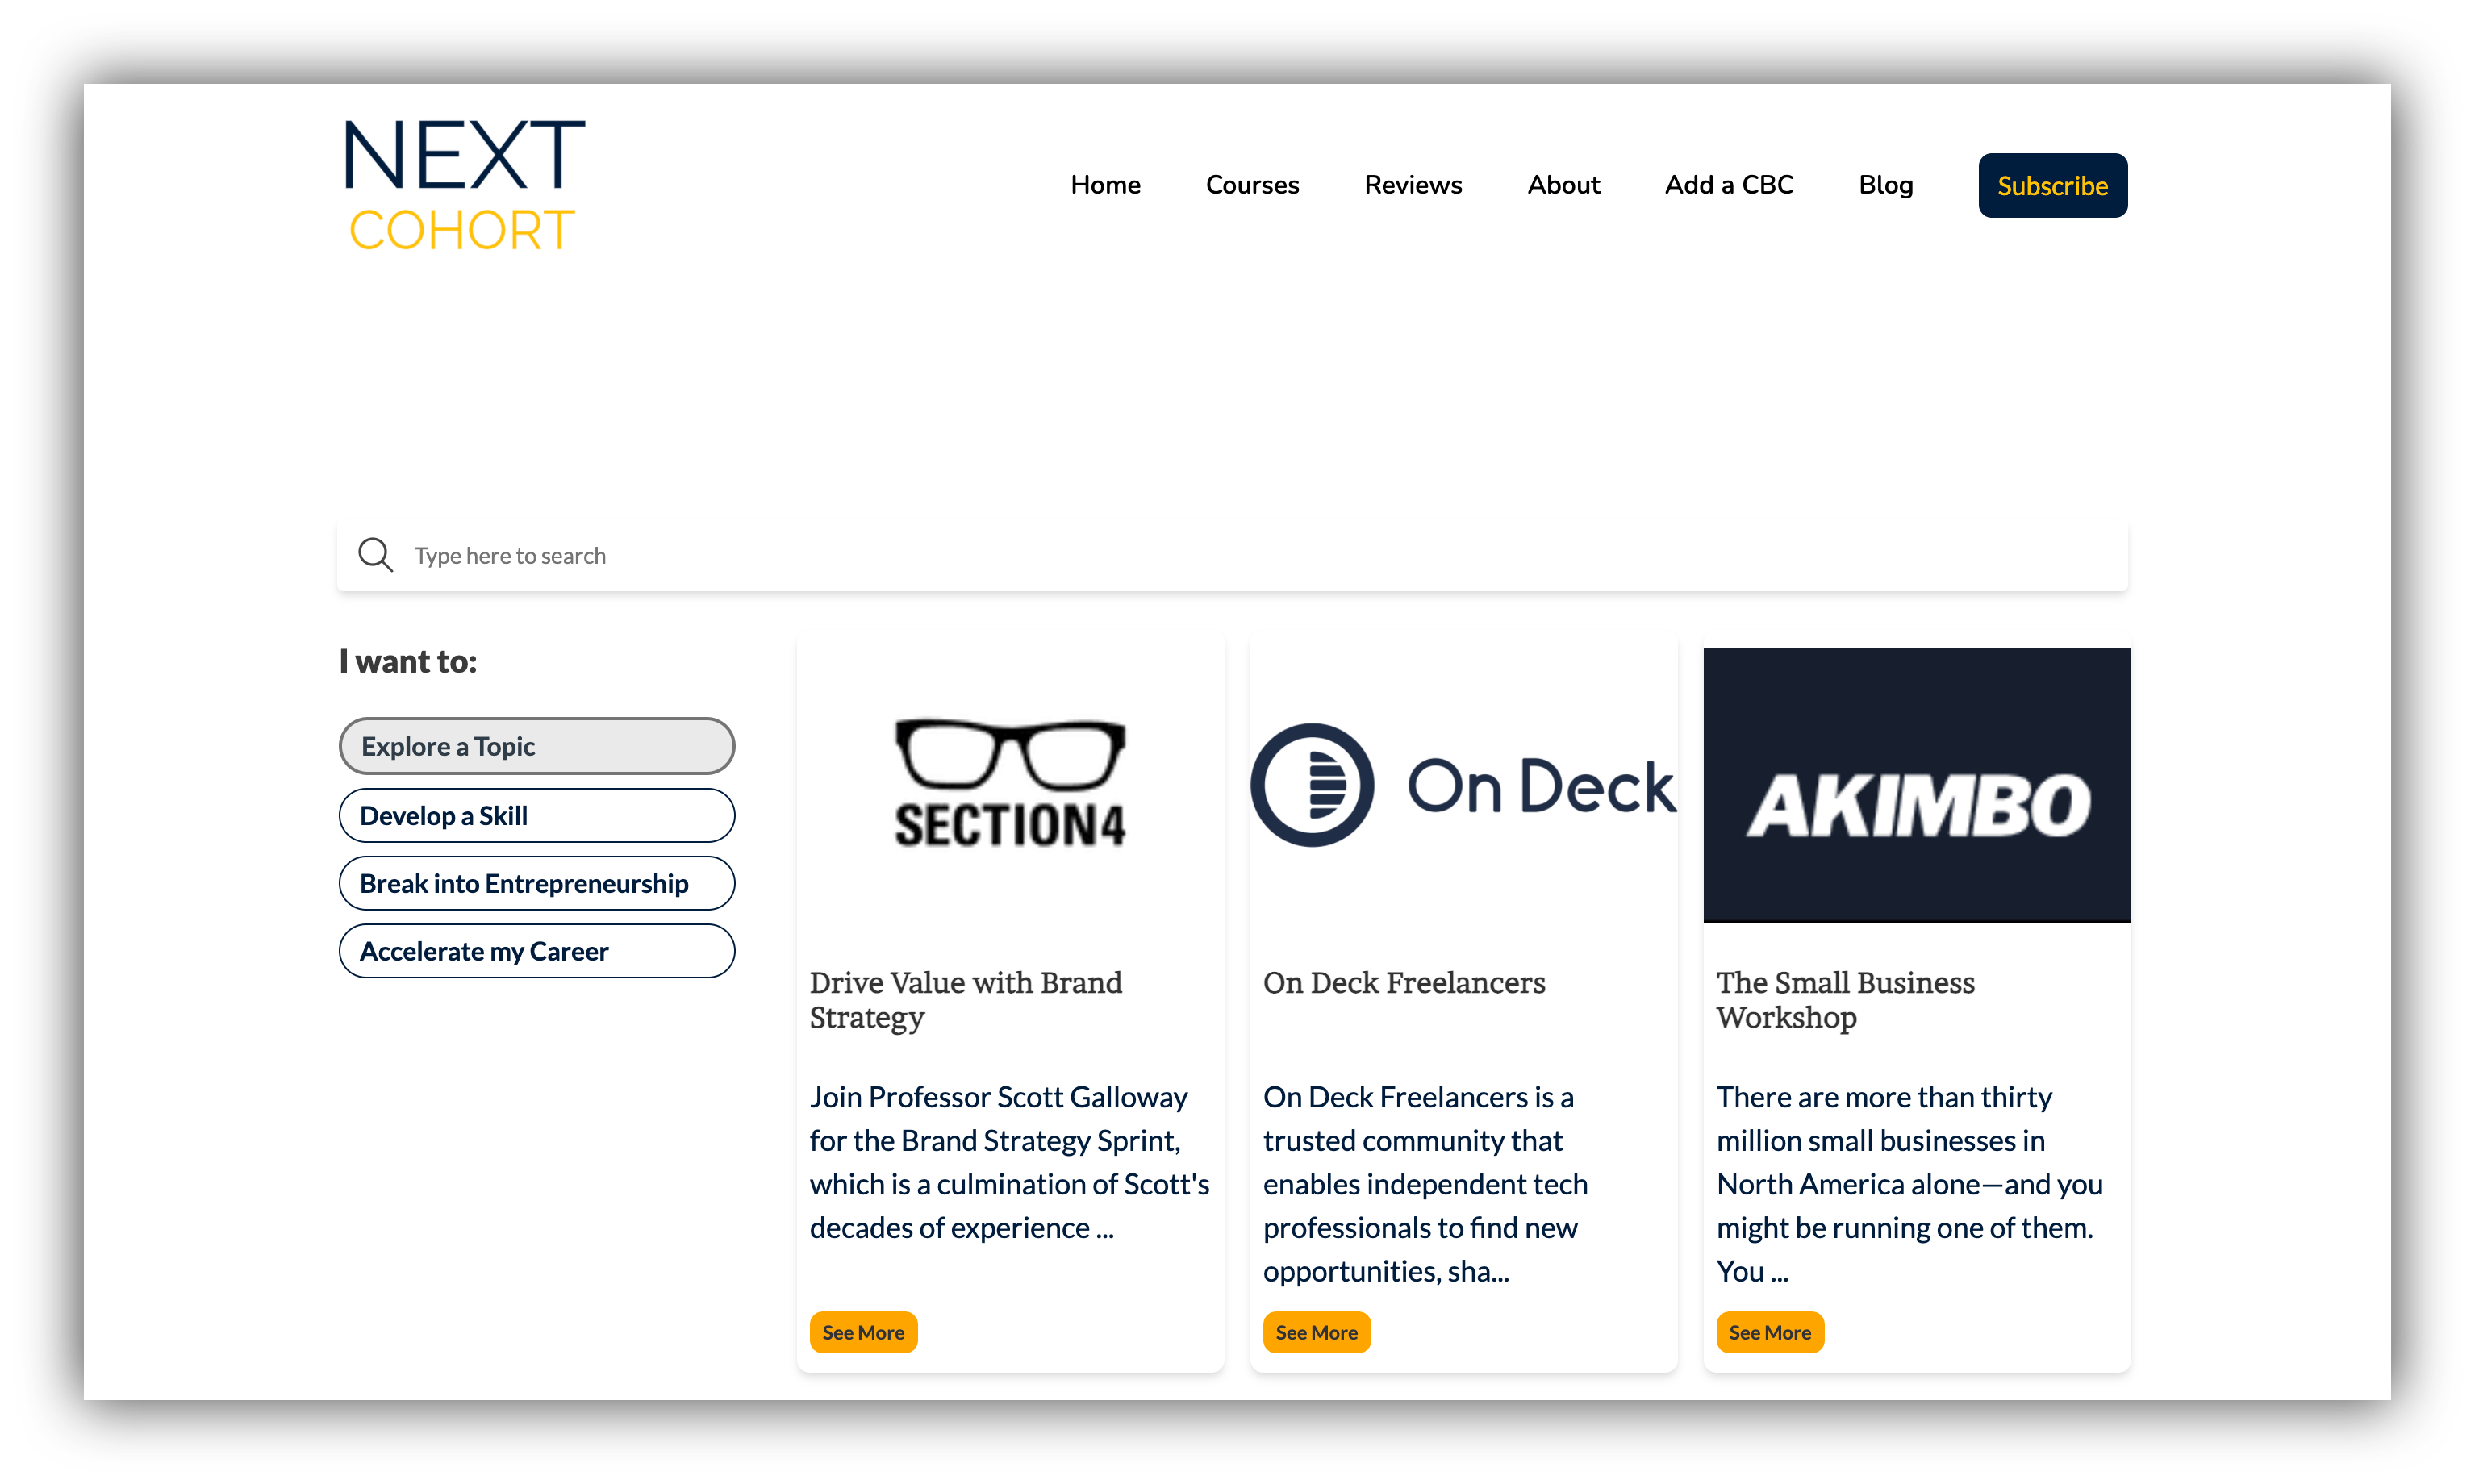 NextCohort courses page